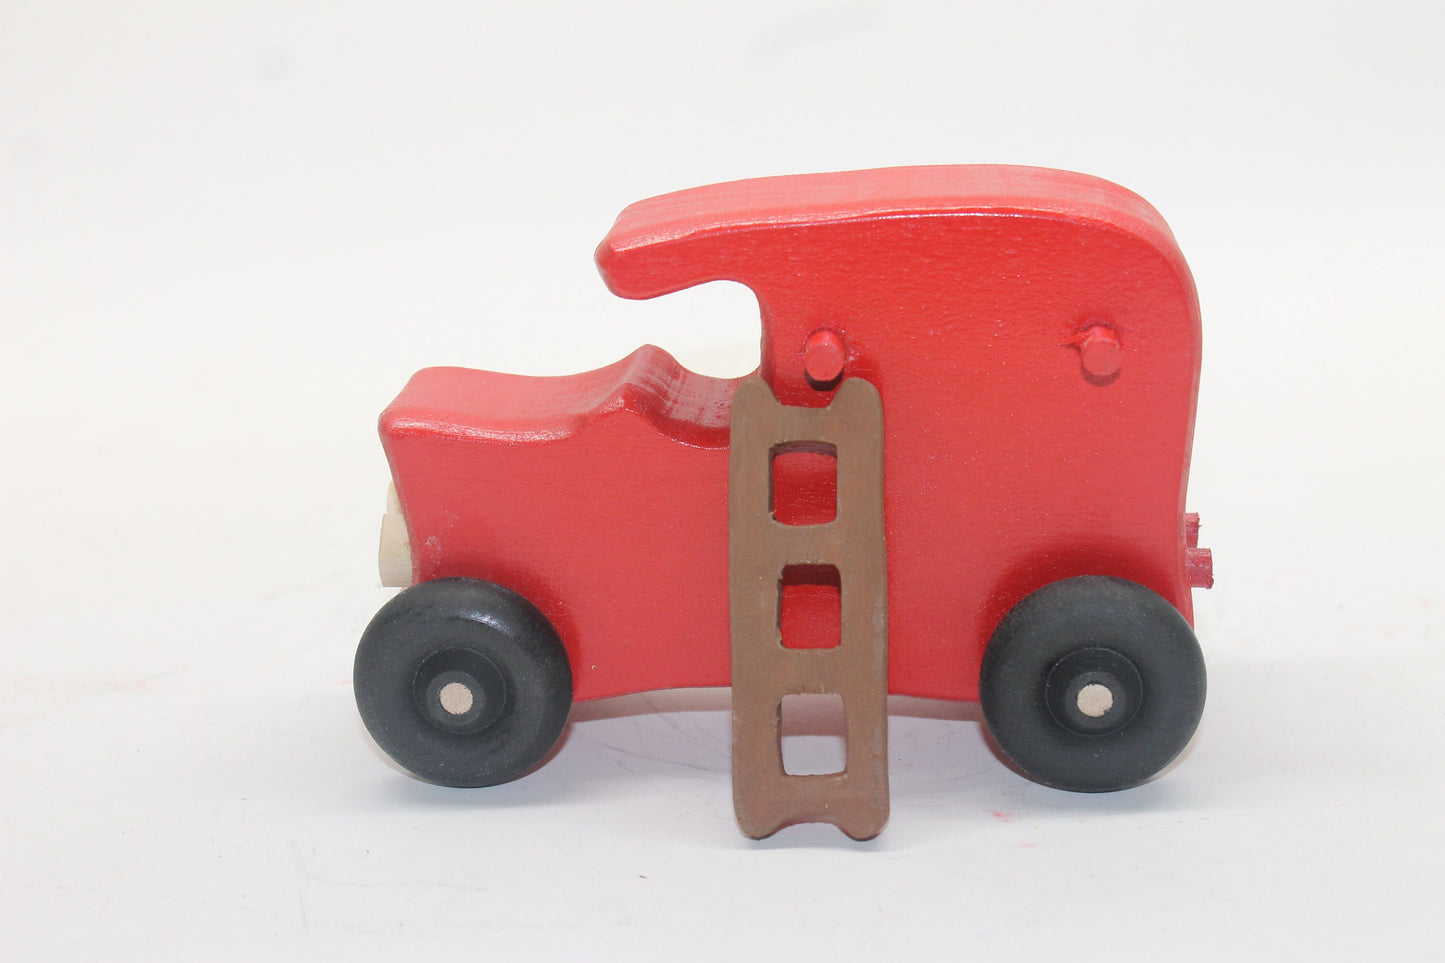 Wooden toy vehicles: fire truck, ambulance, 2 cars. Made from poplar and painted